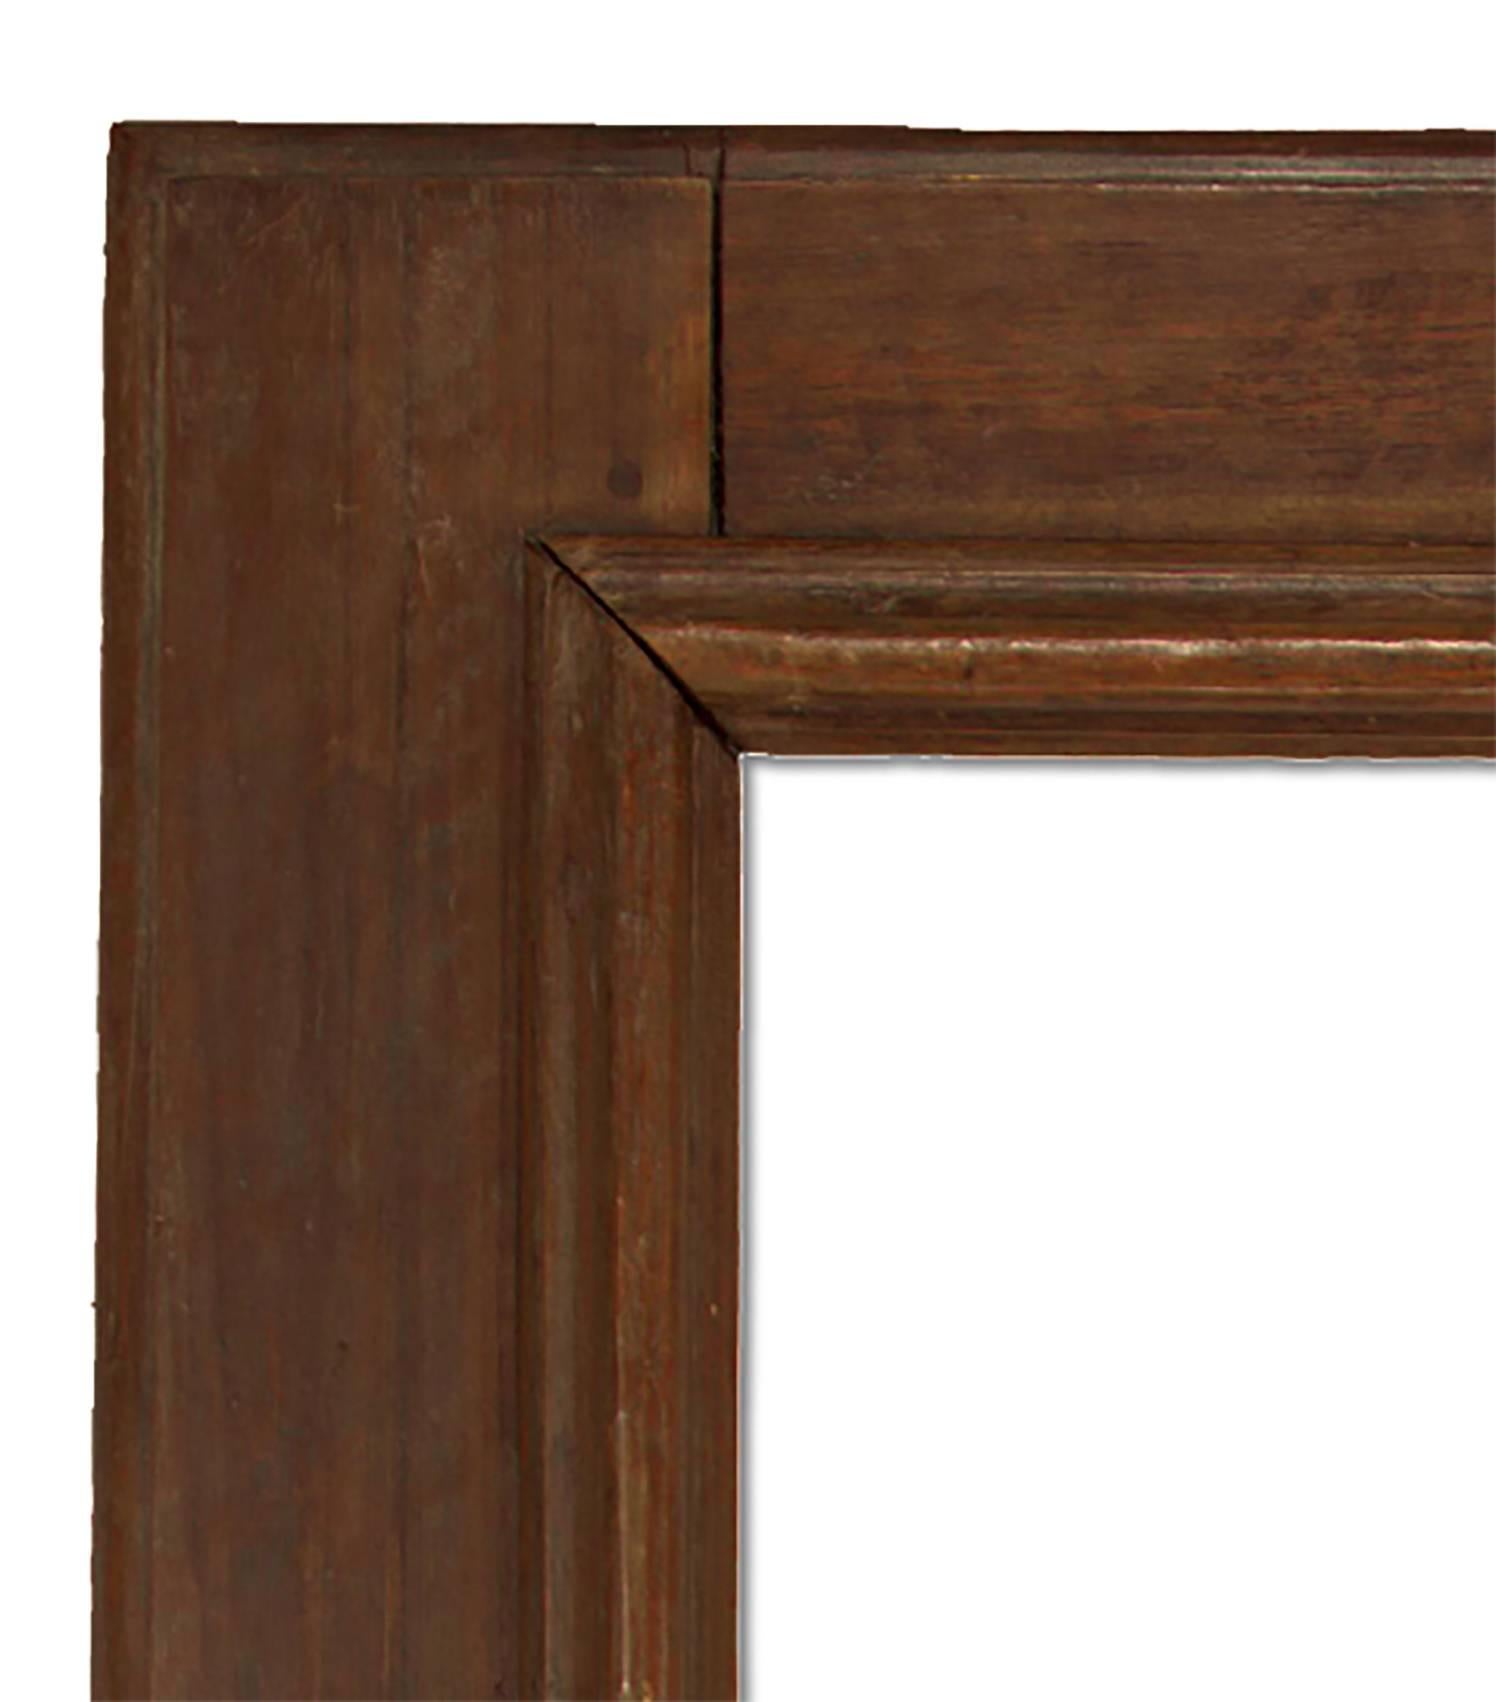 Hand-carved walnut mirror in the 18th Century Italian style. 29